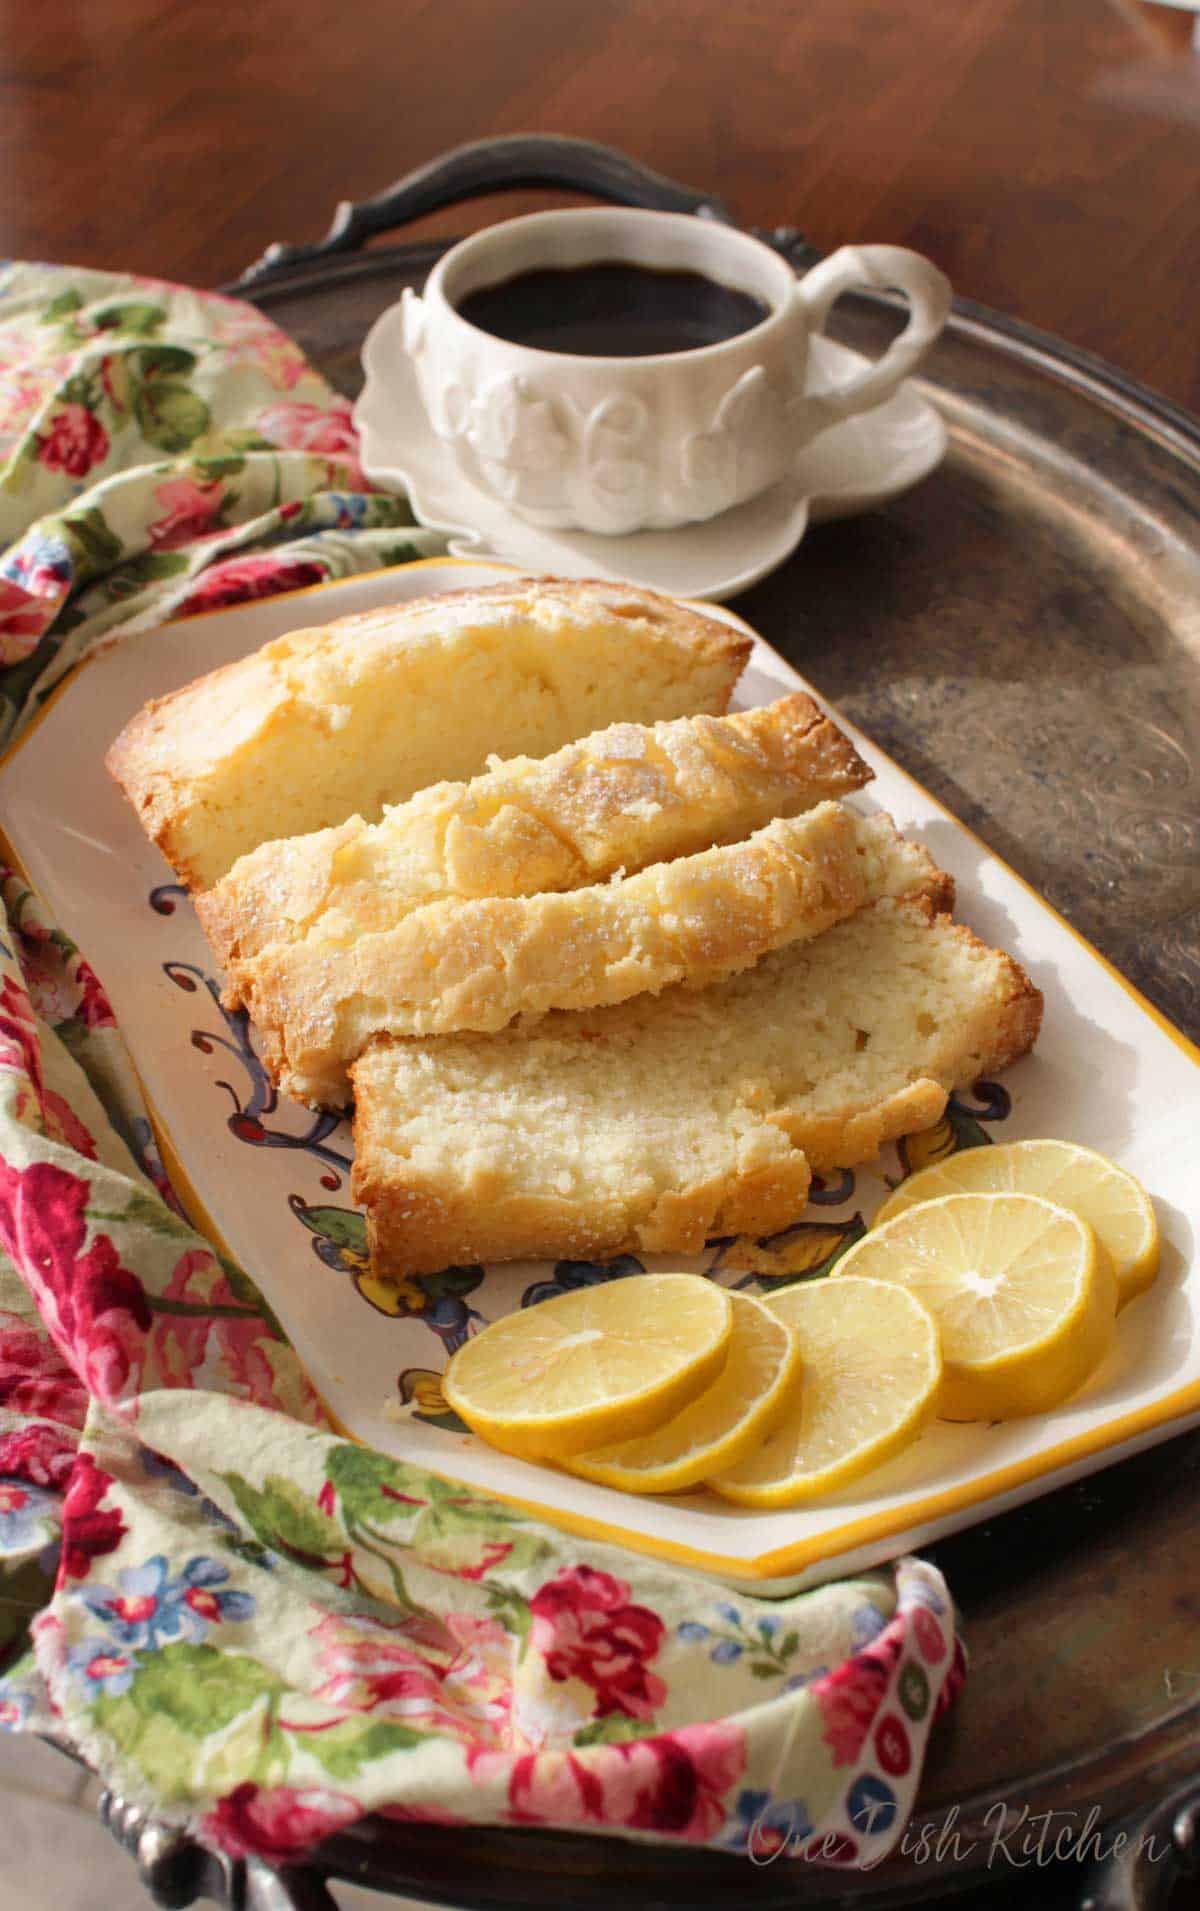 Four slices of pound cake dusted with powdered sugar on a plate with five decorative lemon wheels on a metal tray with a mug of coffee and a floral cloth napkin.